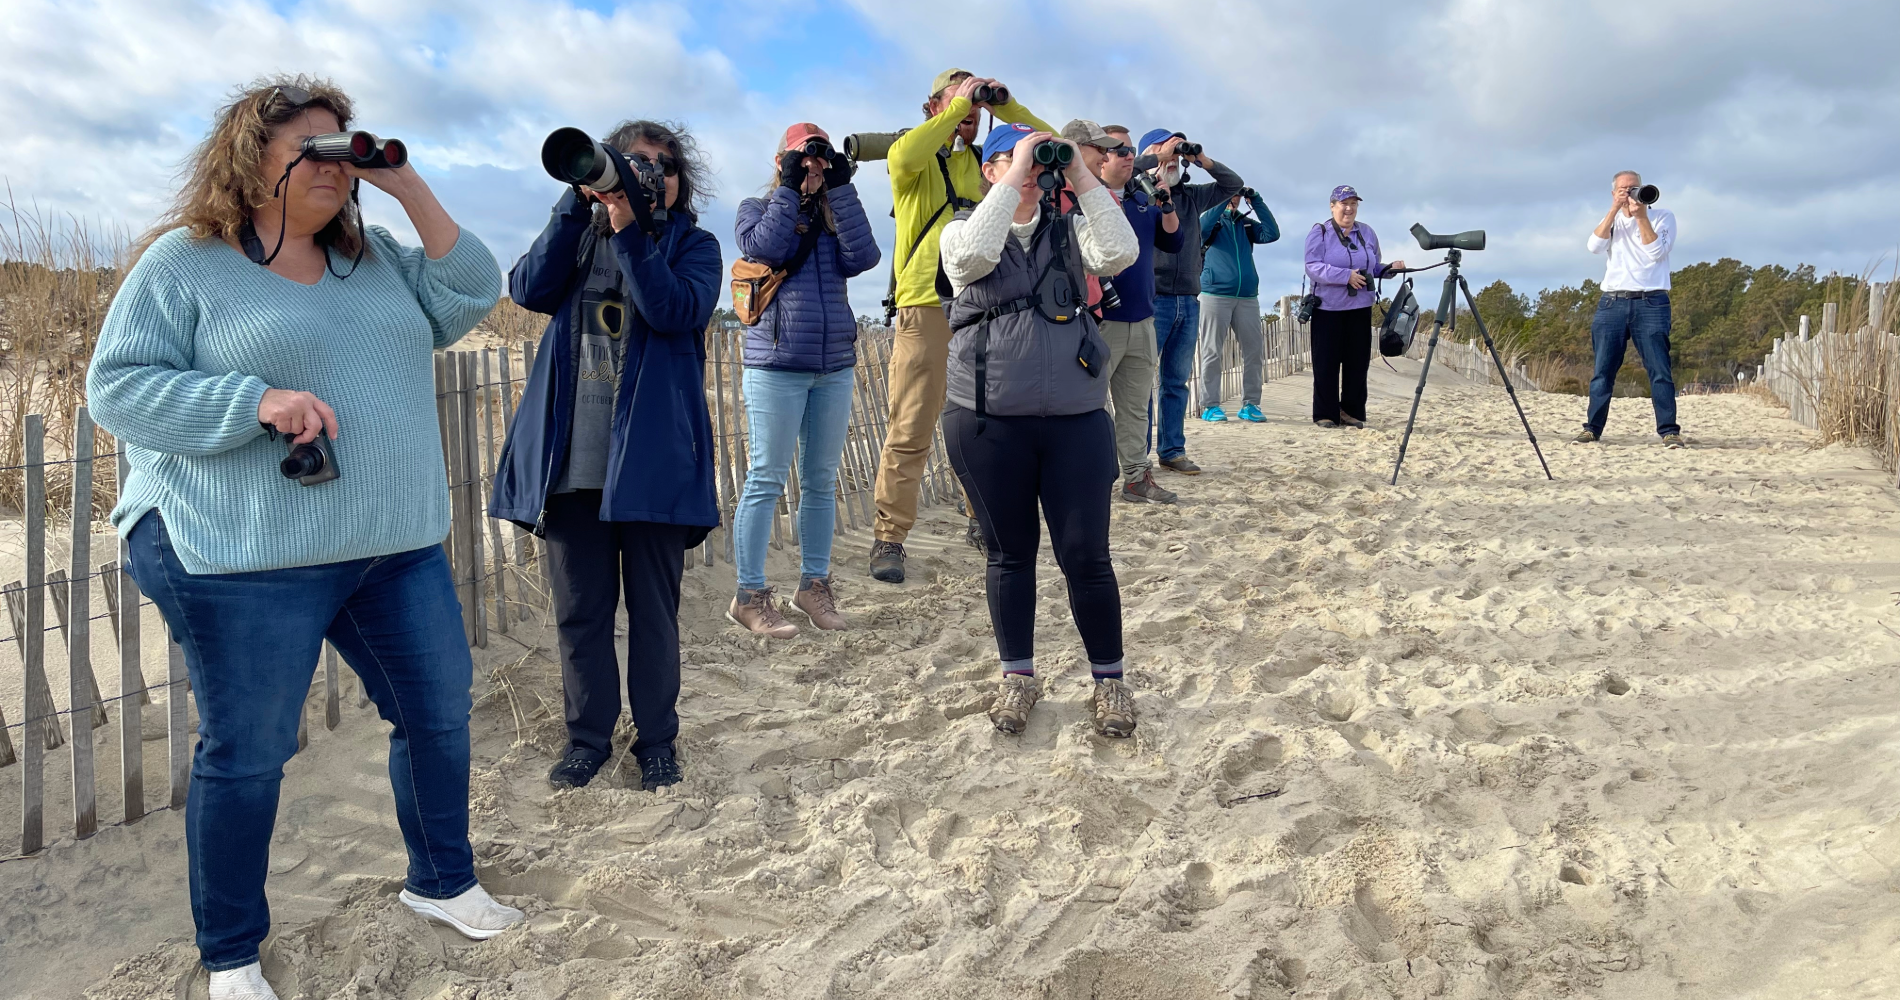 A group of people birding on the beach